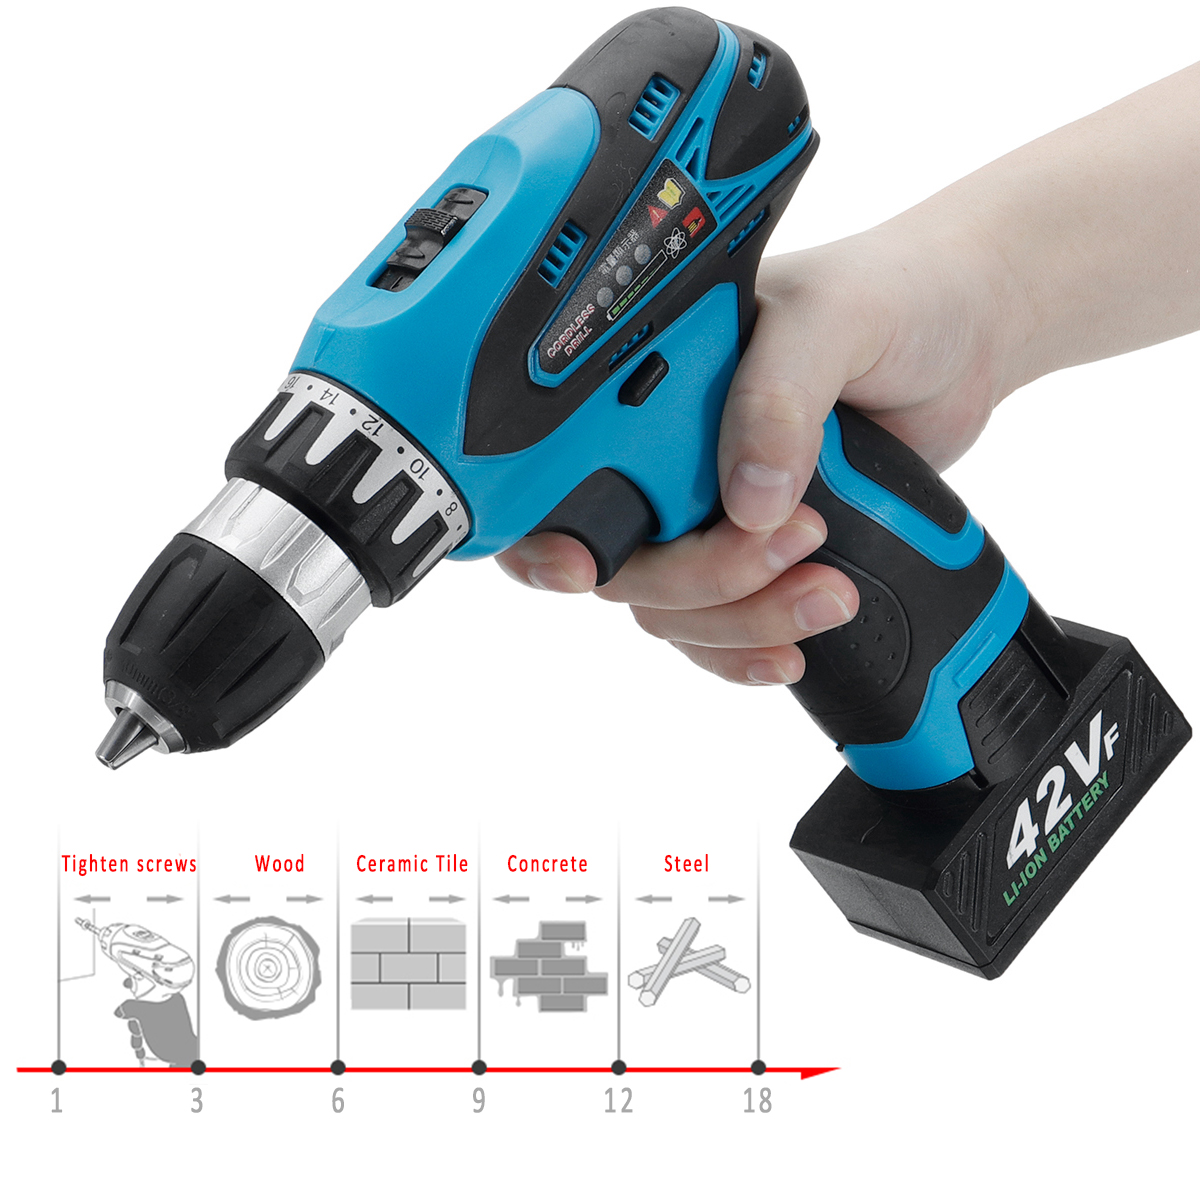 42V-9000mAh-Electric-Cordless-Drill-Driver-LED-2-Speed-Screwdriver-W-1-or-2-Li-Ion-Battery-1451594-4